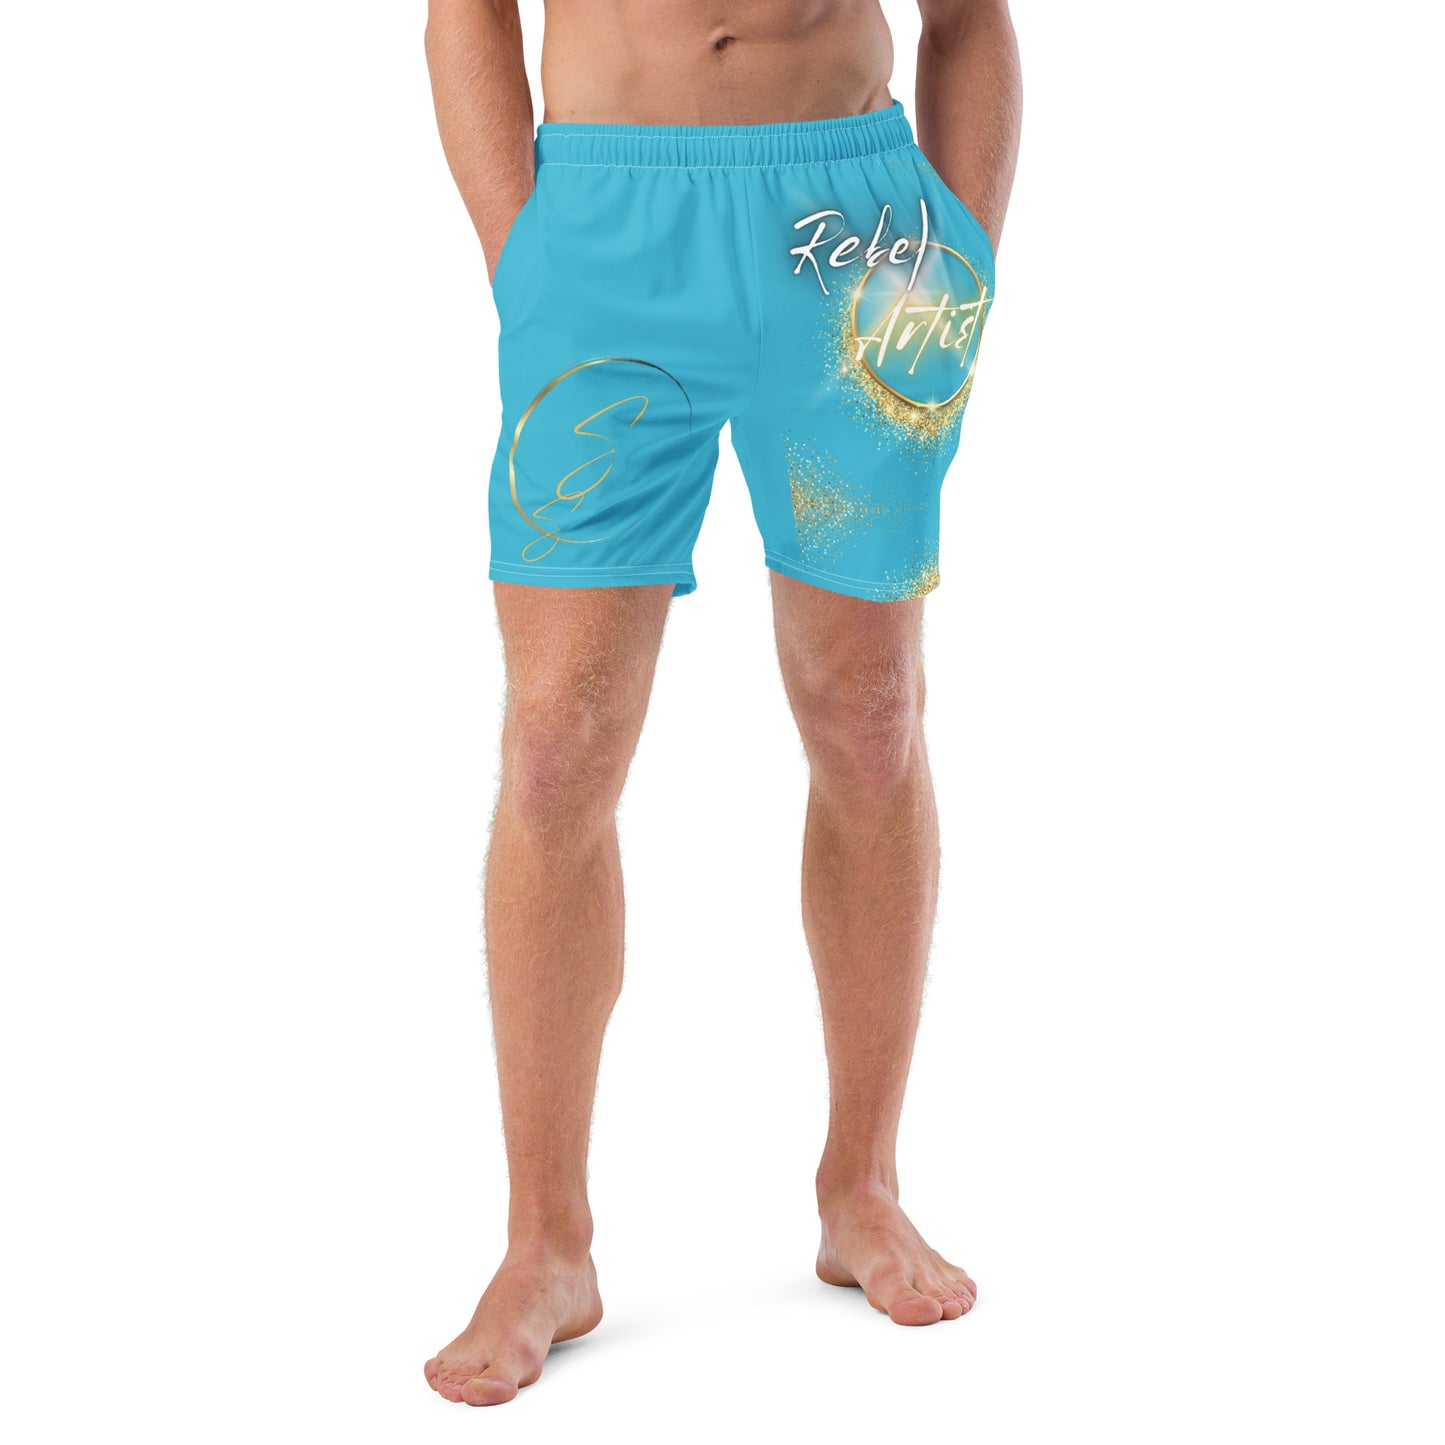 Bright Summer Sky Rebel Artist Swim Trunks - Colorful swim trunks capturing attention and style, designed for artists seeking recognition and self-expression.